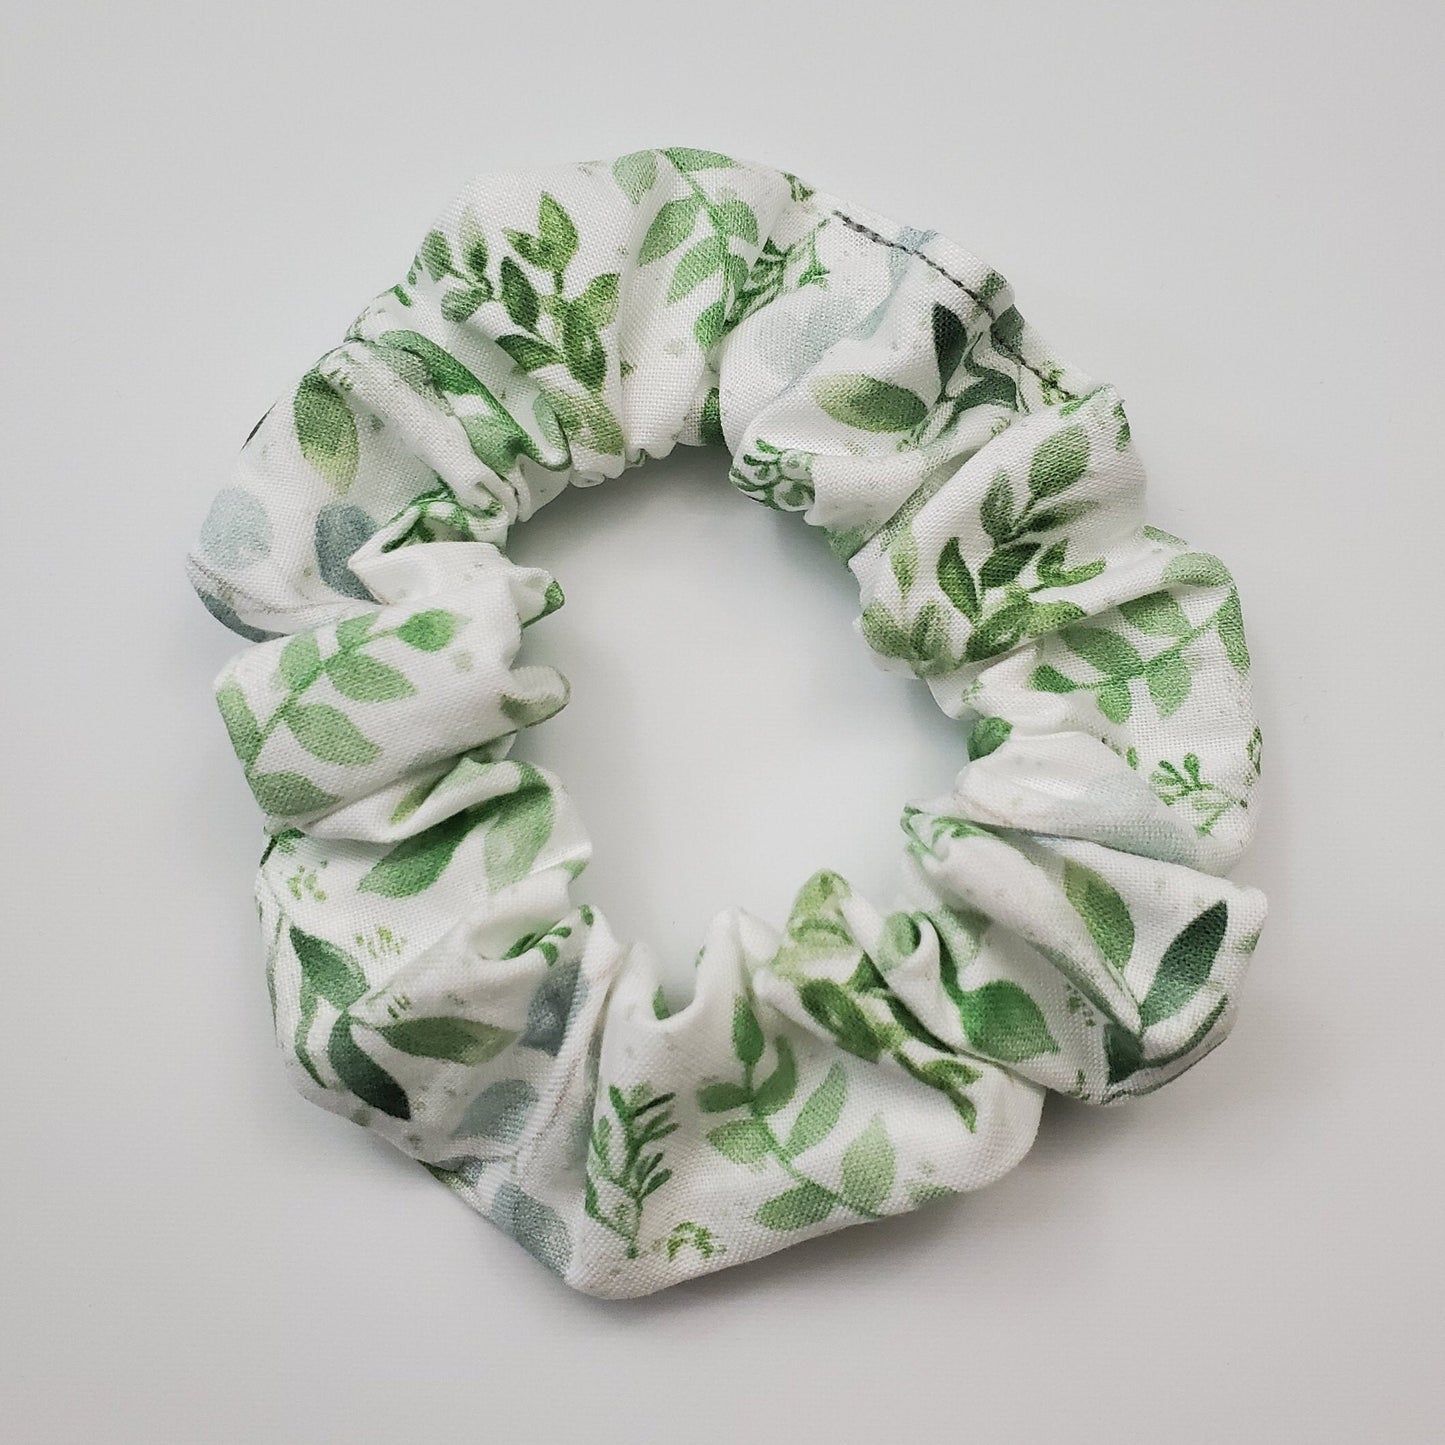 White scrunchie with light green eucalyptus leaves. The leaves appear to be painted in watercolor and have various vines and other leaves around.